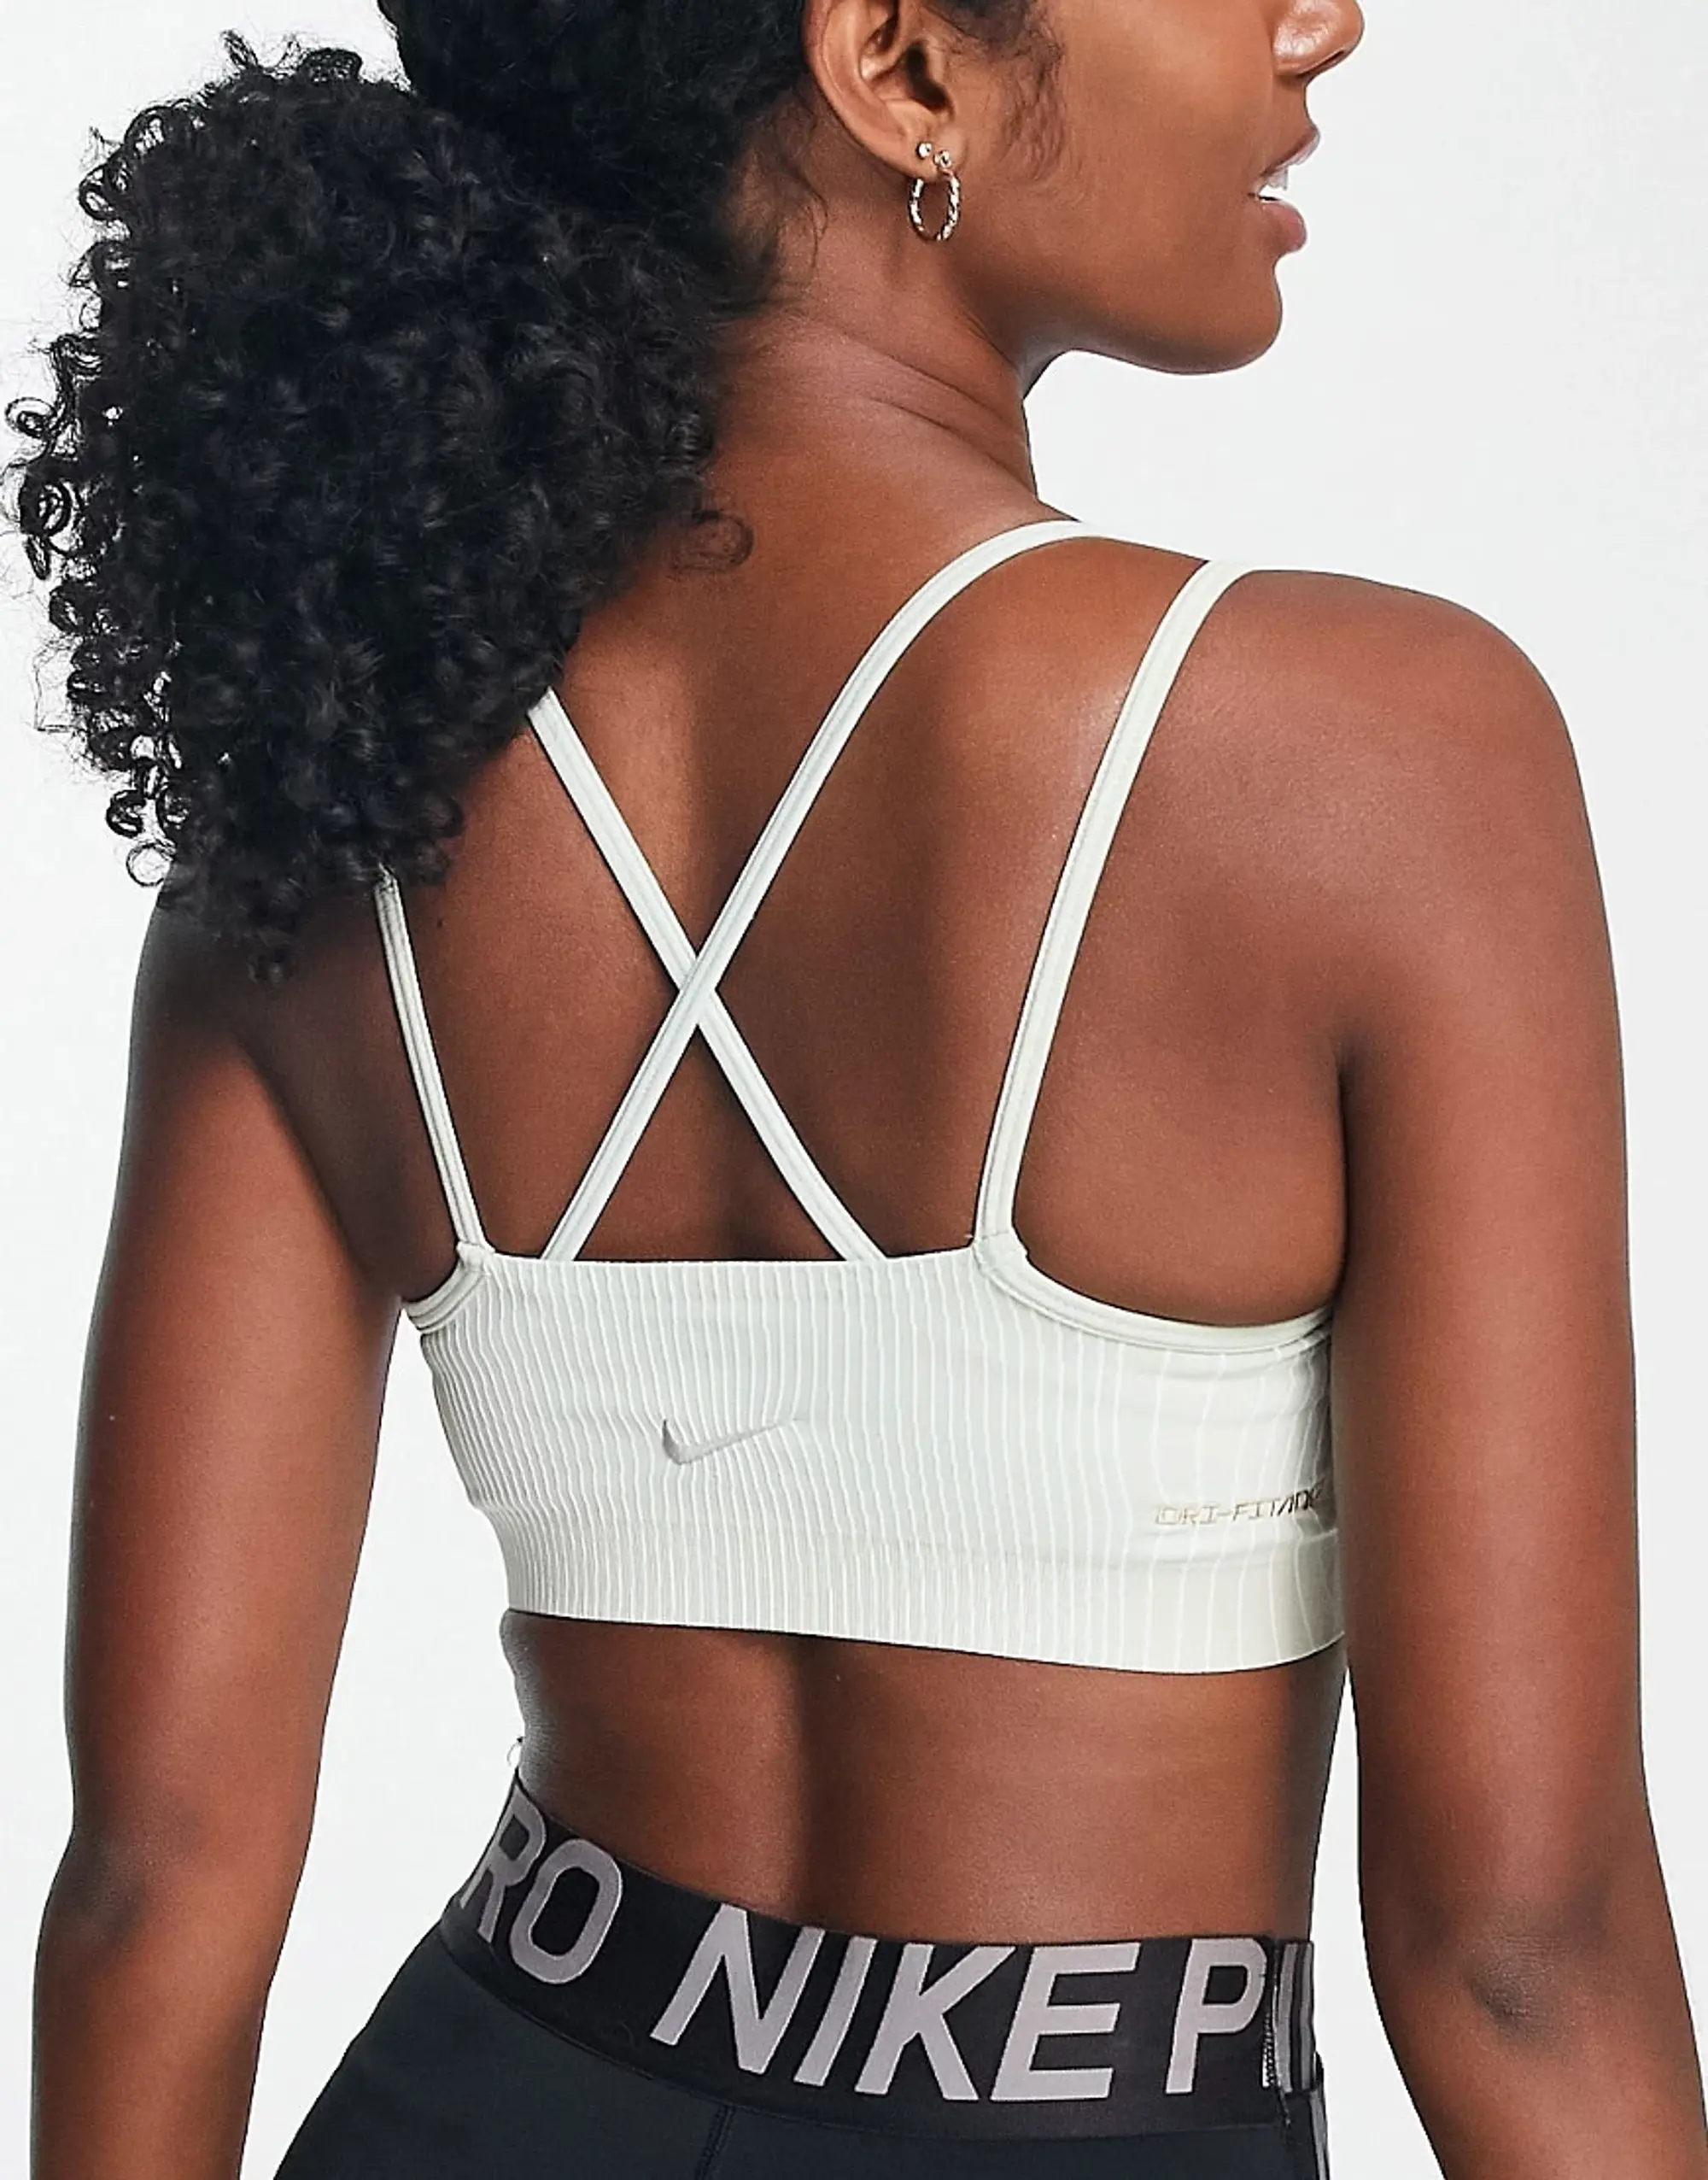 Nike Yoga Adv Indy Seamless light support sports bra in off white and mint, DM0549-126